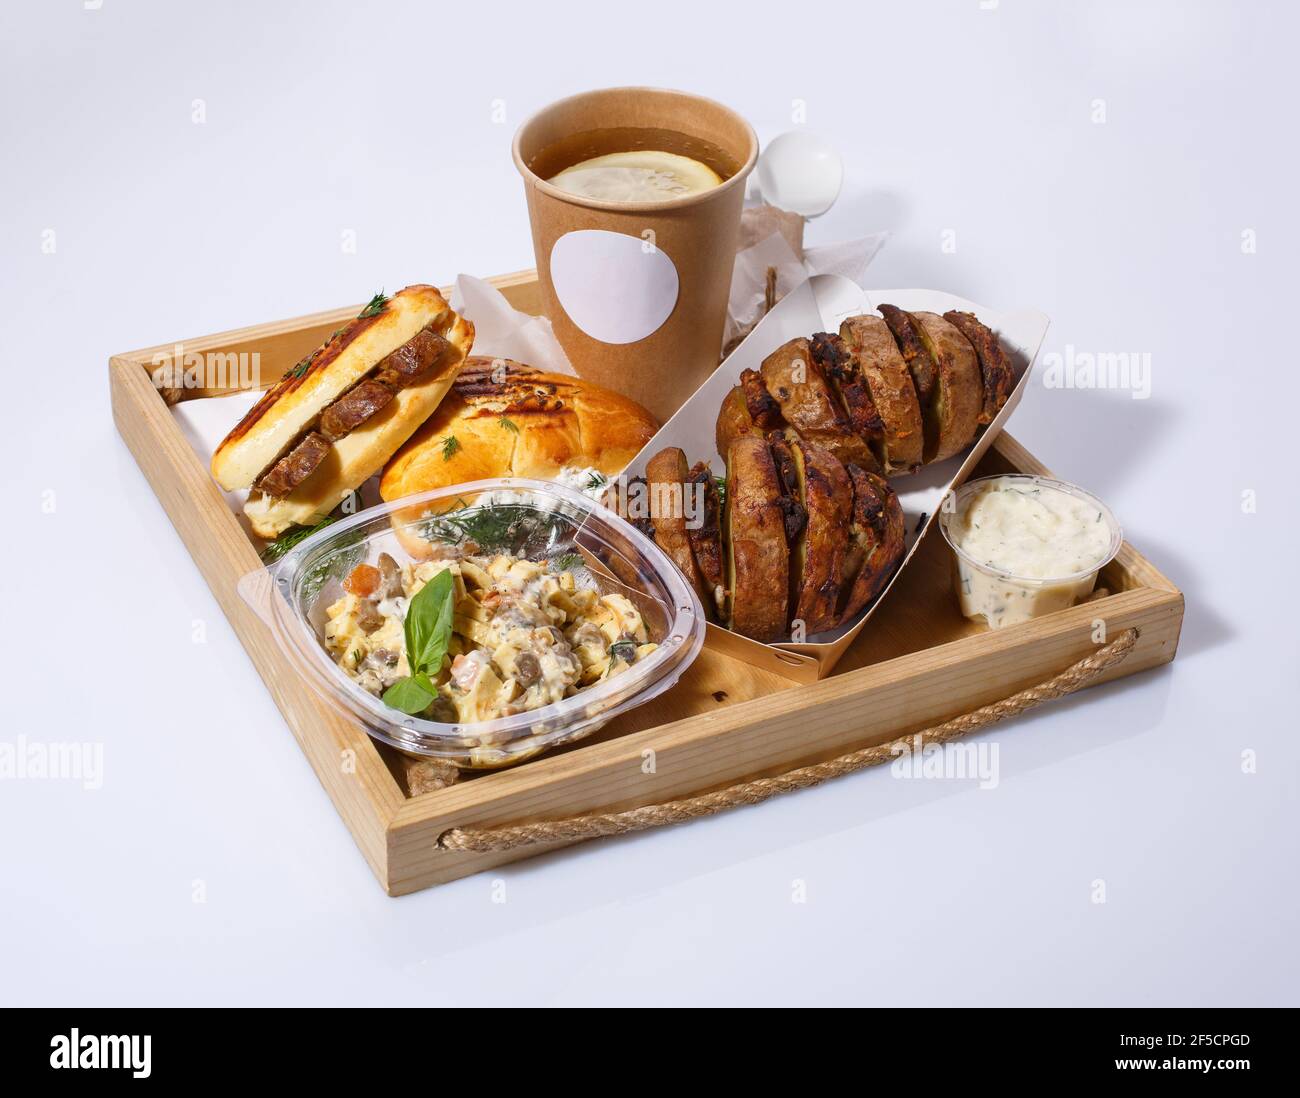 Delicious lunch with disposable tableware on wooden tray. Lemon tea, salad, baked potatoes with meat, sauce and buns. Stock Photo